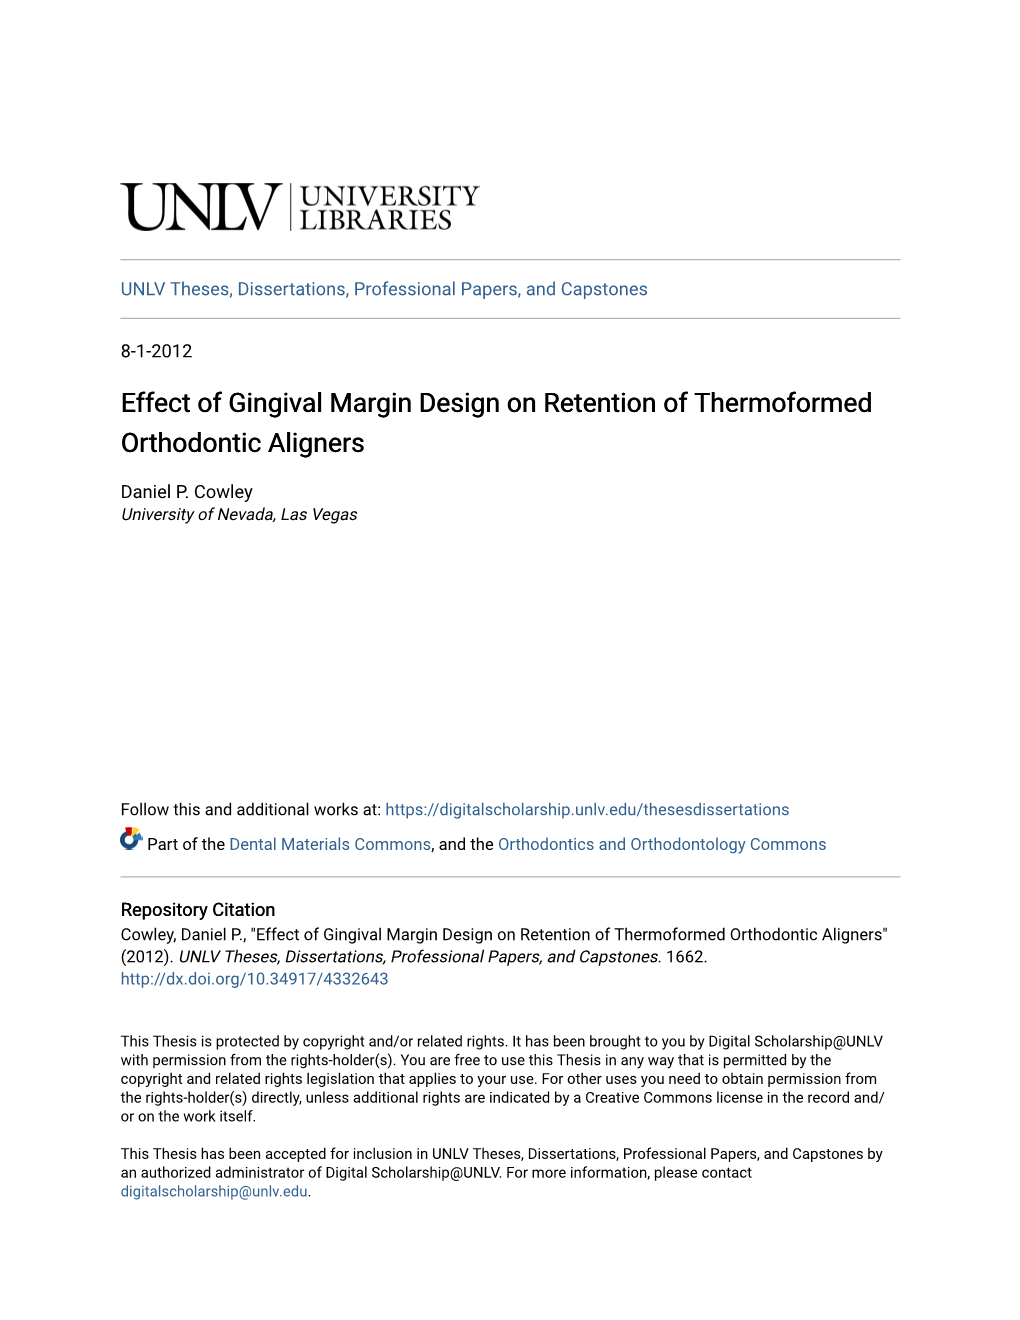 Effect of Gingival Margin Design on Retention of Thermoformed Orthodontic Aligners